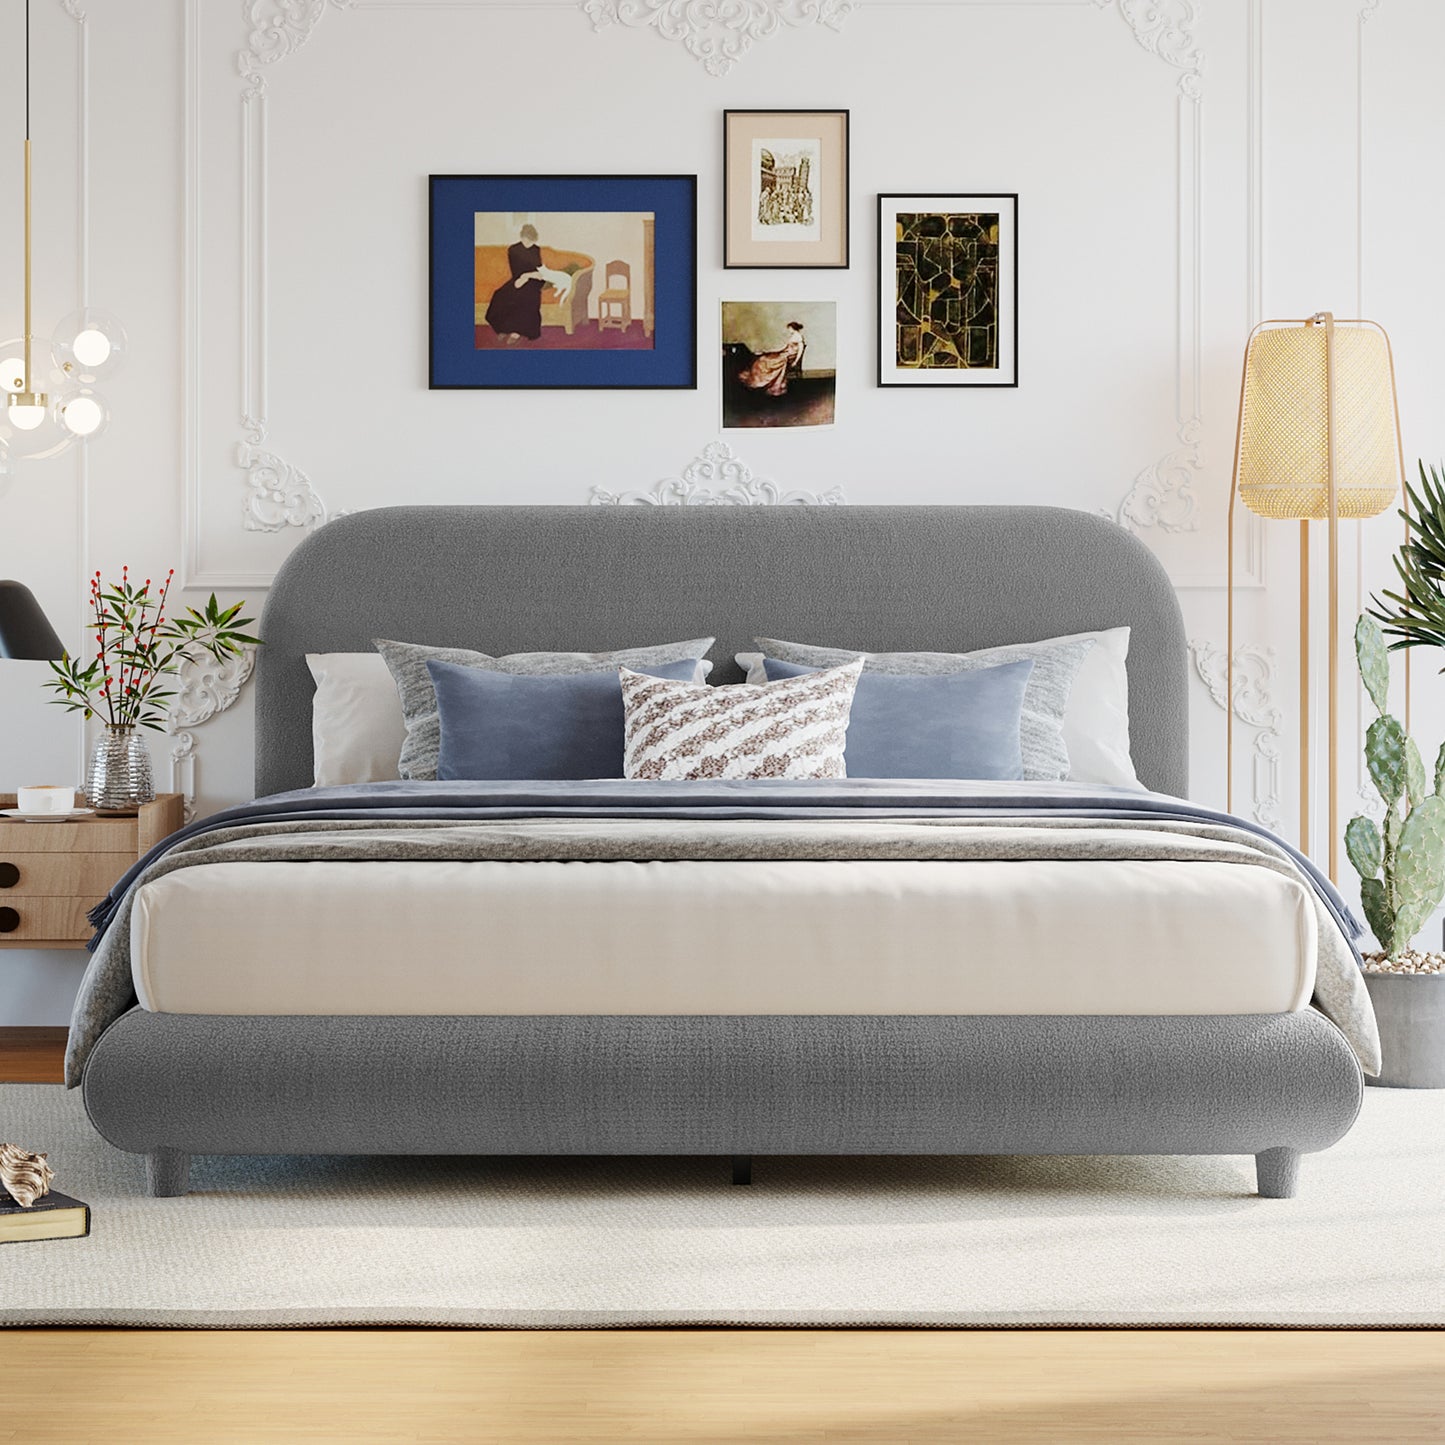 Teddy Fleece Queen Size Upholstered Platform Bed with Thick Fabric, Solid Frame and Stylish Curve-shaped Design, Gray